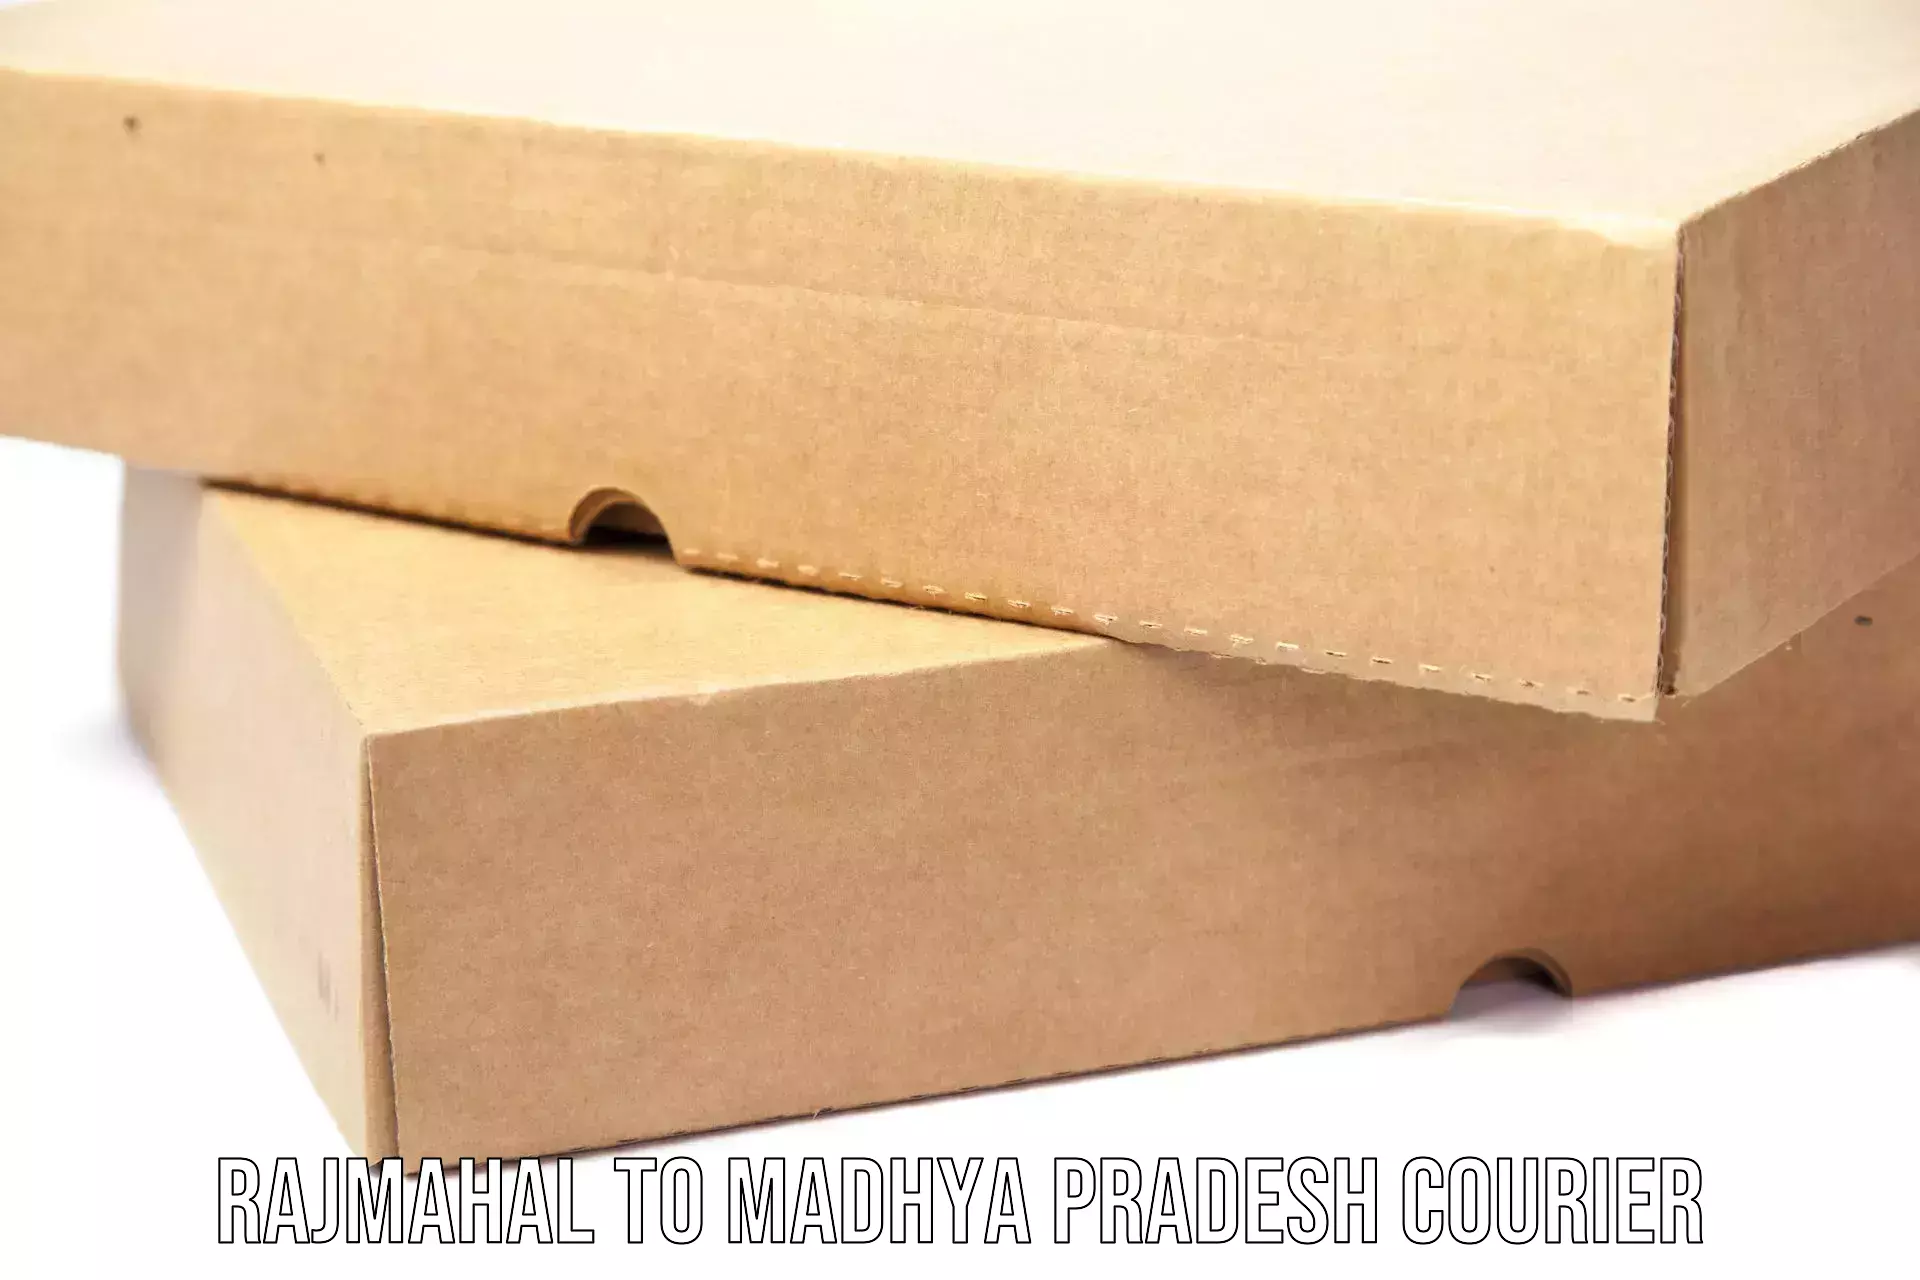 Special handling courier in Rajmahal to Bhopal